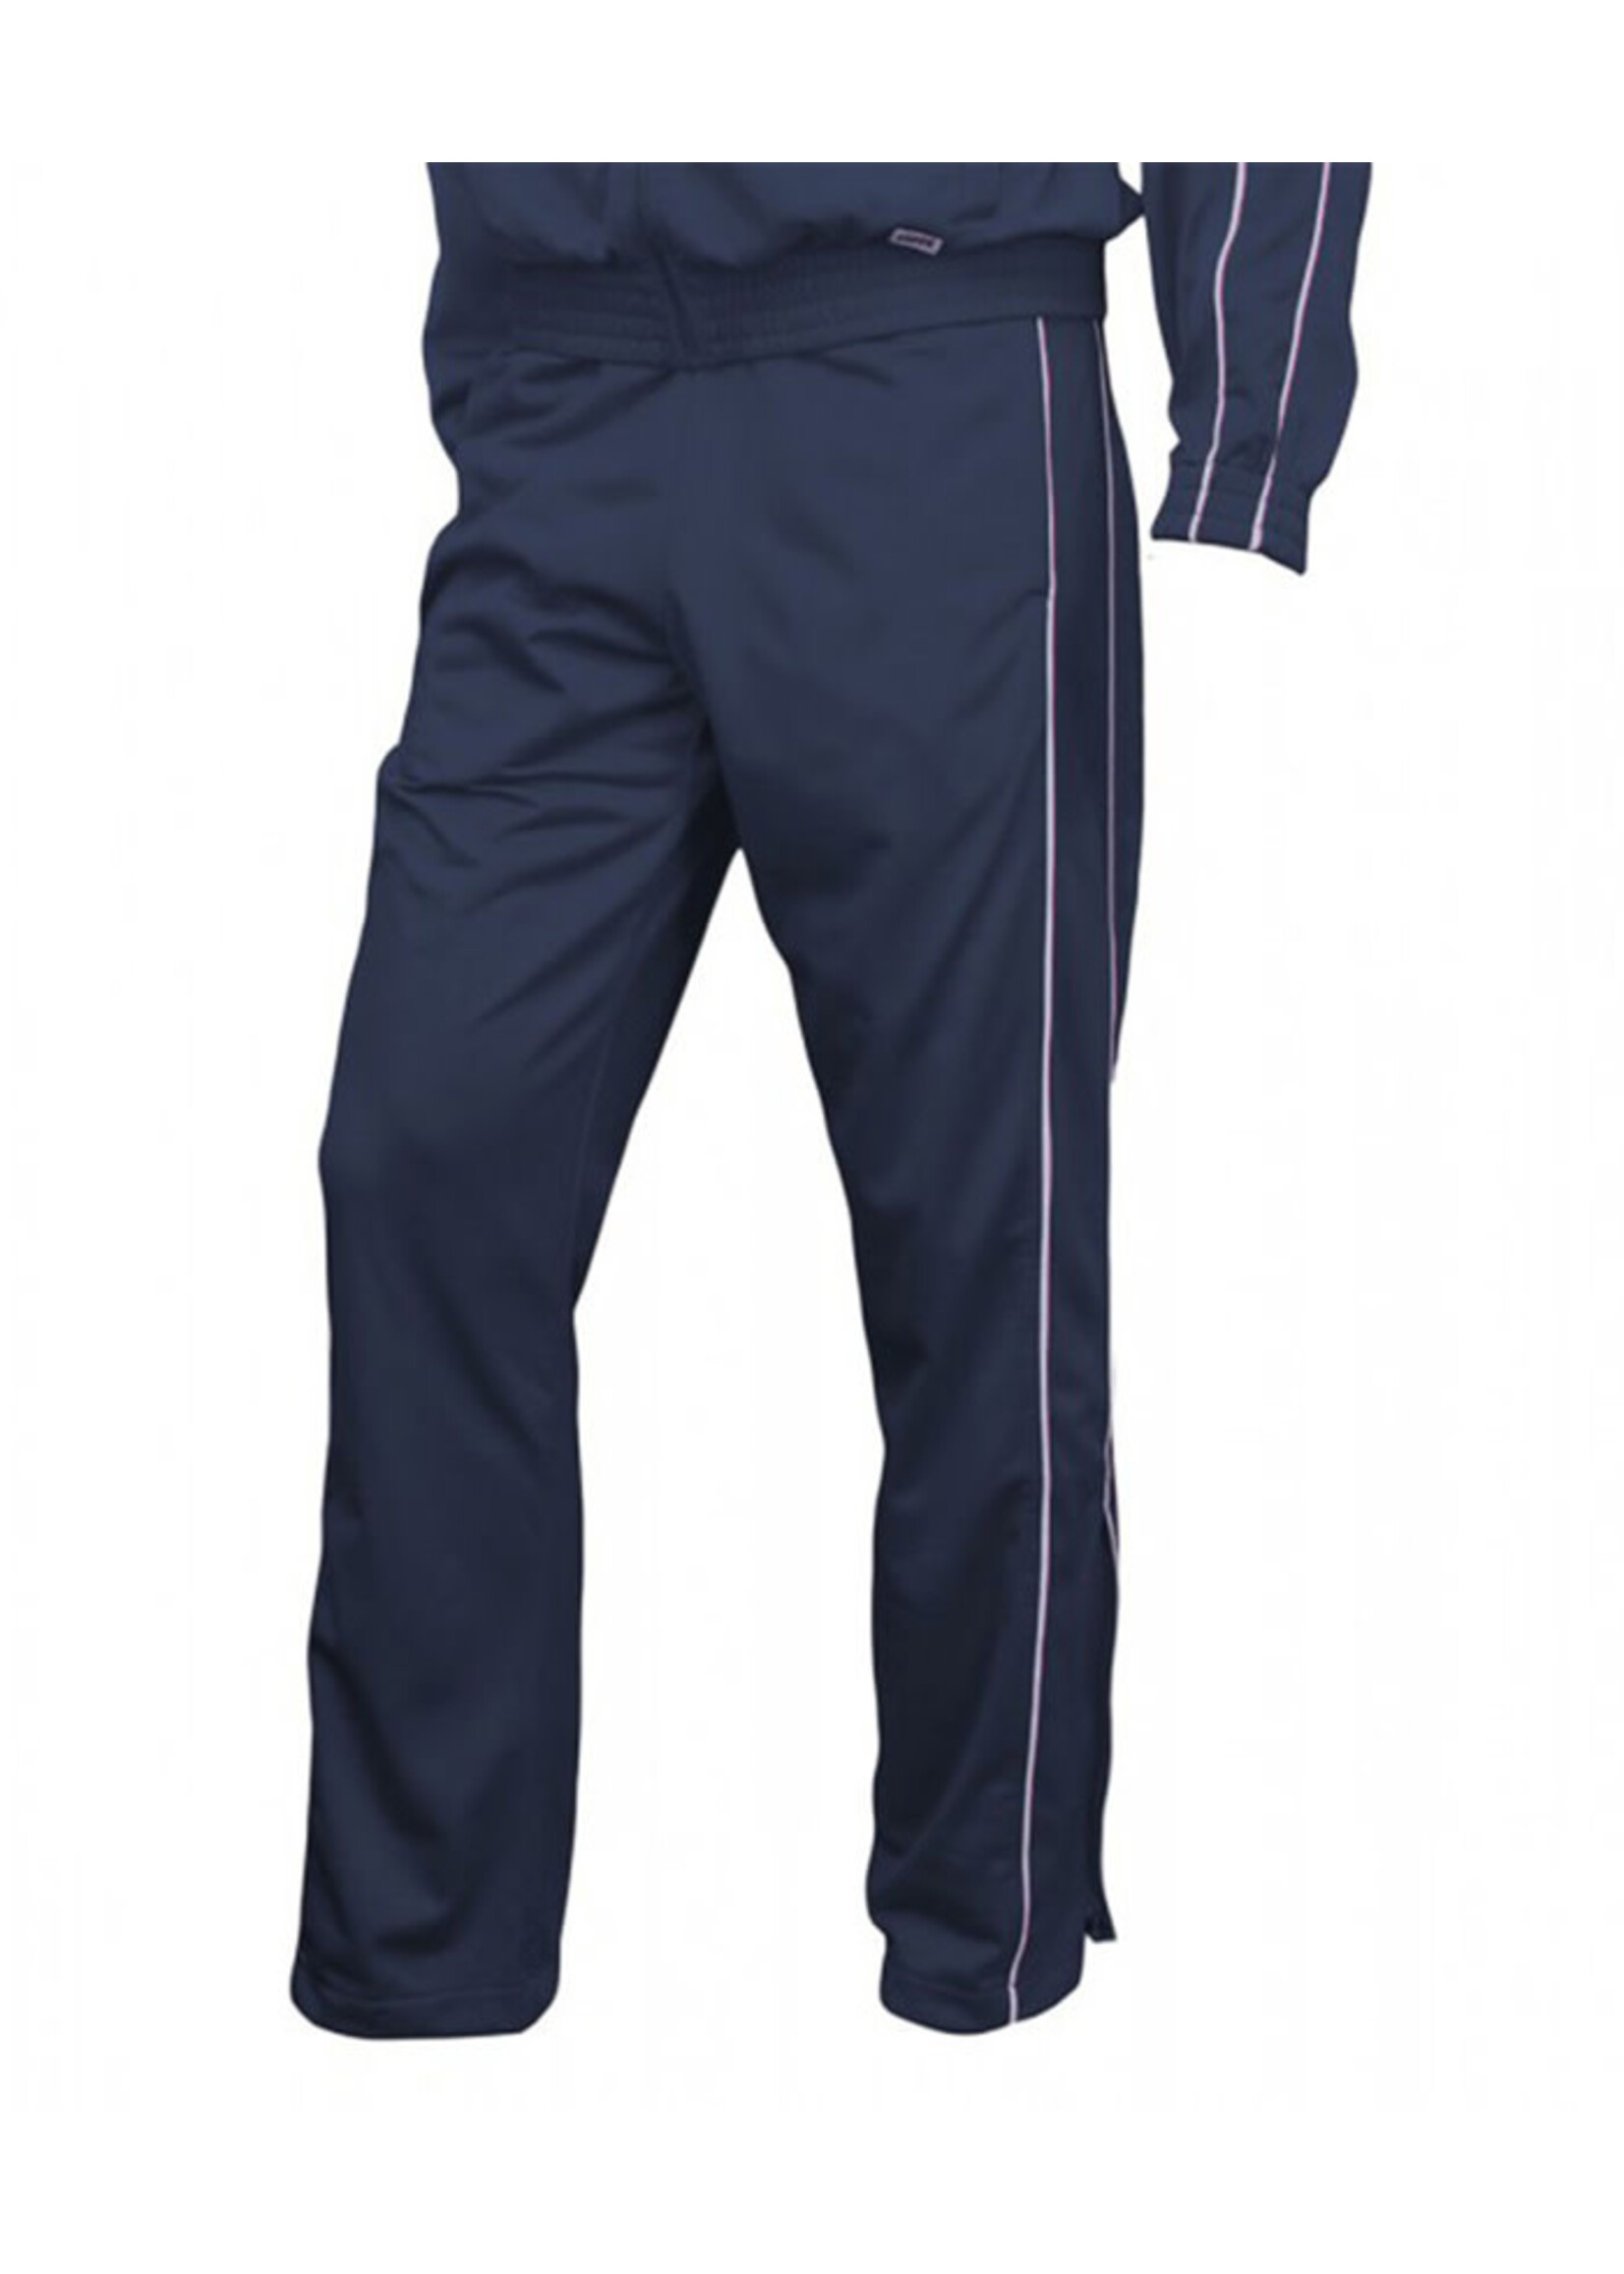 Navy Tricot Warm Up Pants